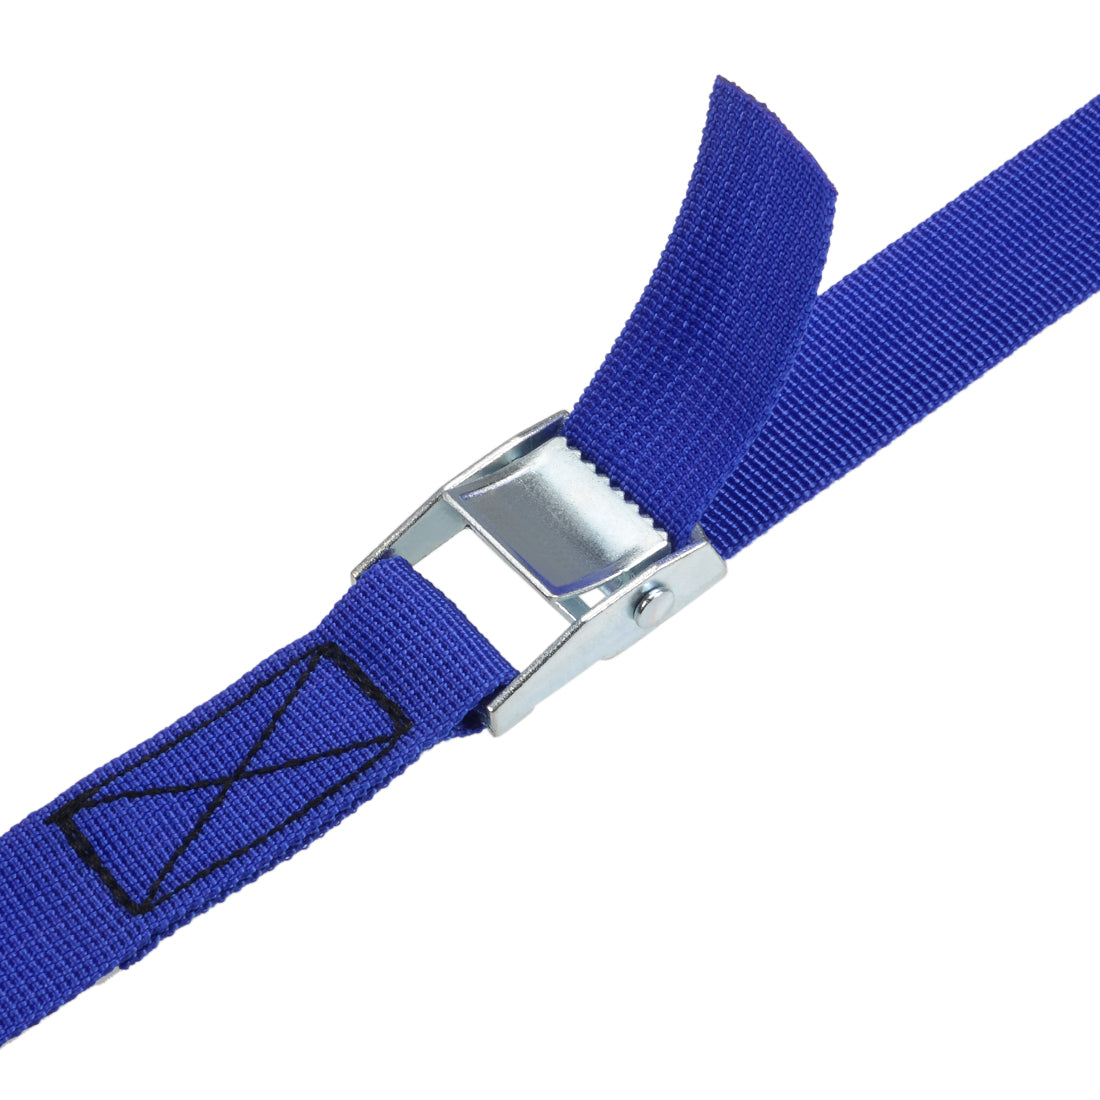 uxcell Uxcell 10M x 25mm Lashing Strap Cargo Tie Down Straps w Cam Lock Buckle 250Kg Work Load, Blue, 2Pcs